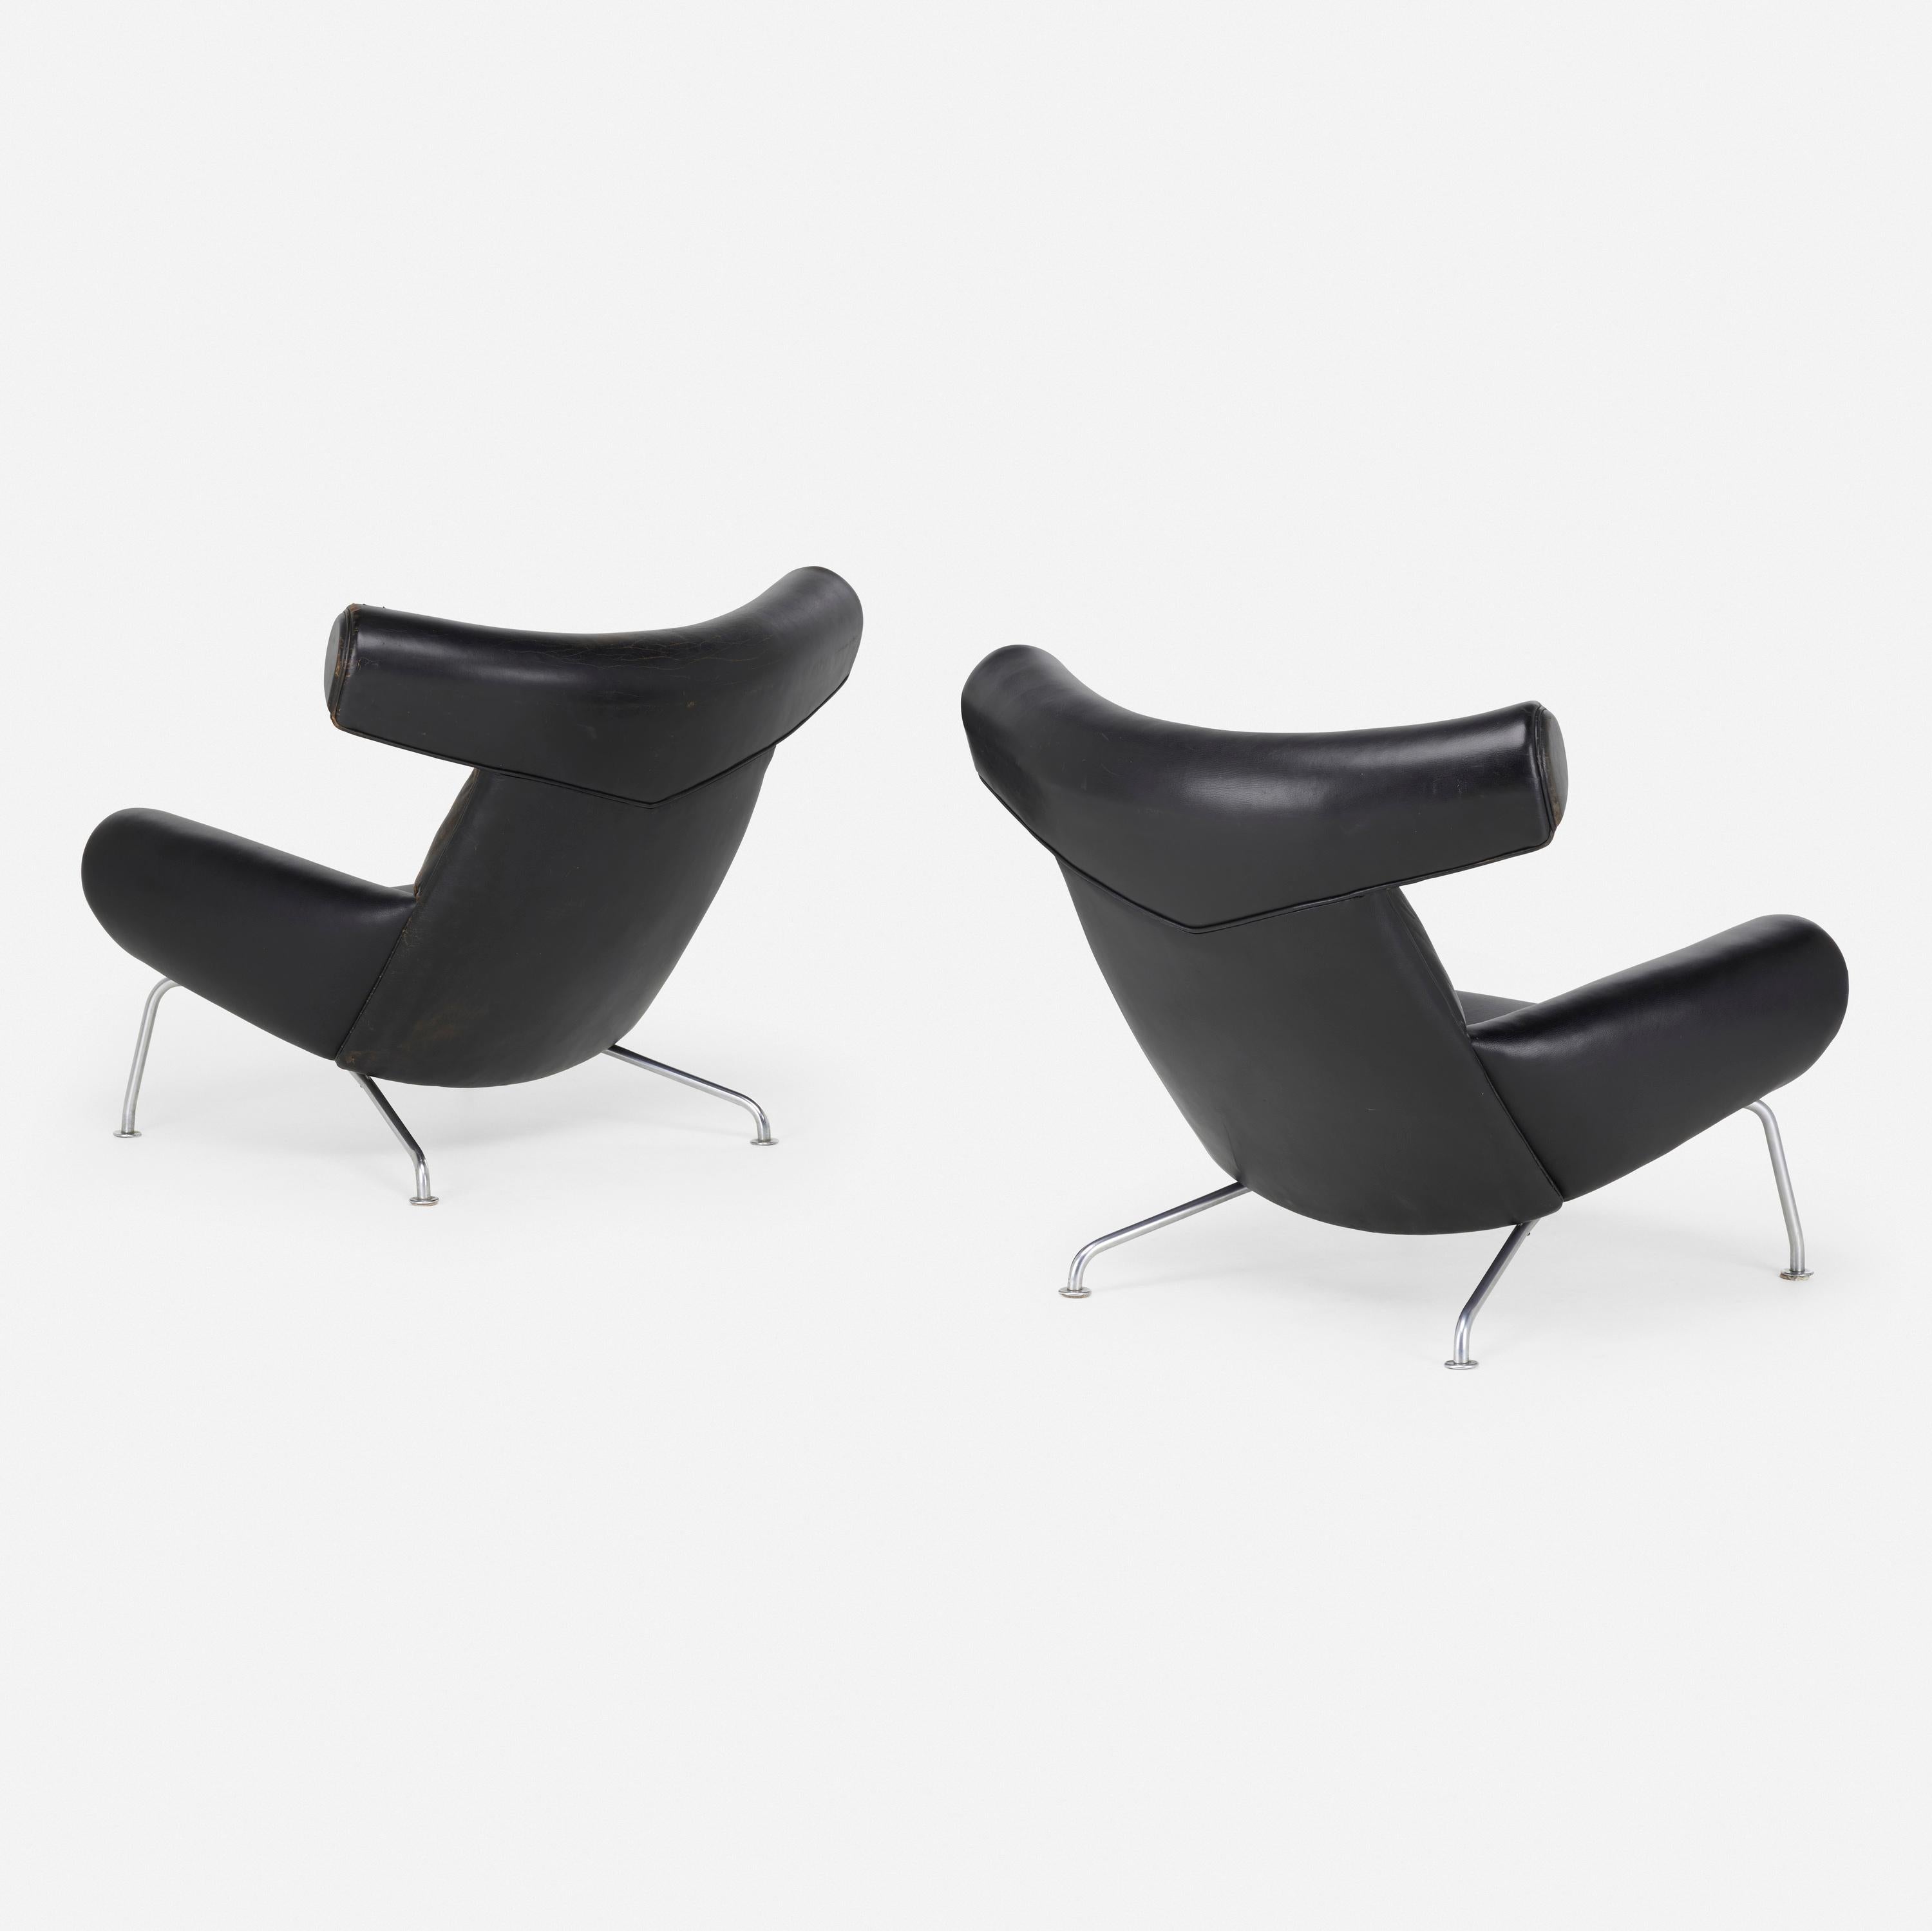 Beautiful Ox chairs, model AP 46 by Hans J. Wegner. A.P. Stolen, Denmark, 1960. Black leather and matte-chromed steel, with manufacturer's label on the underside. Can be sold as a pair or $13,000 each.